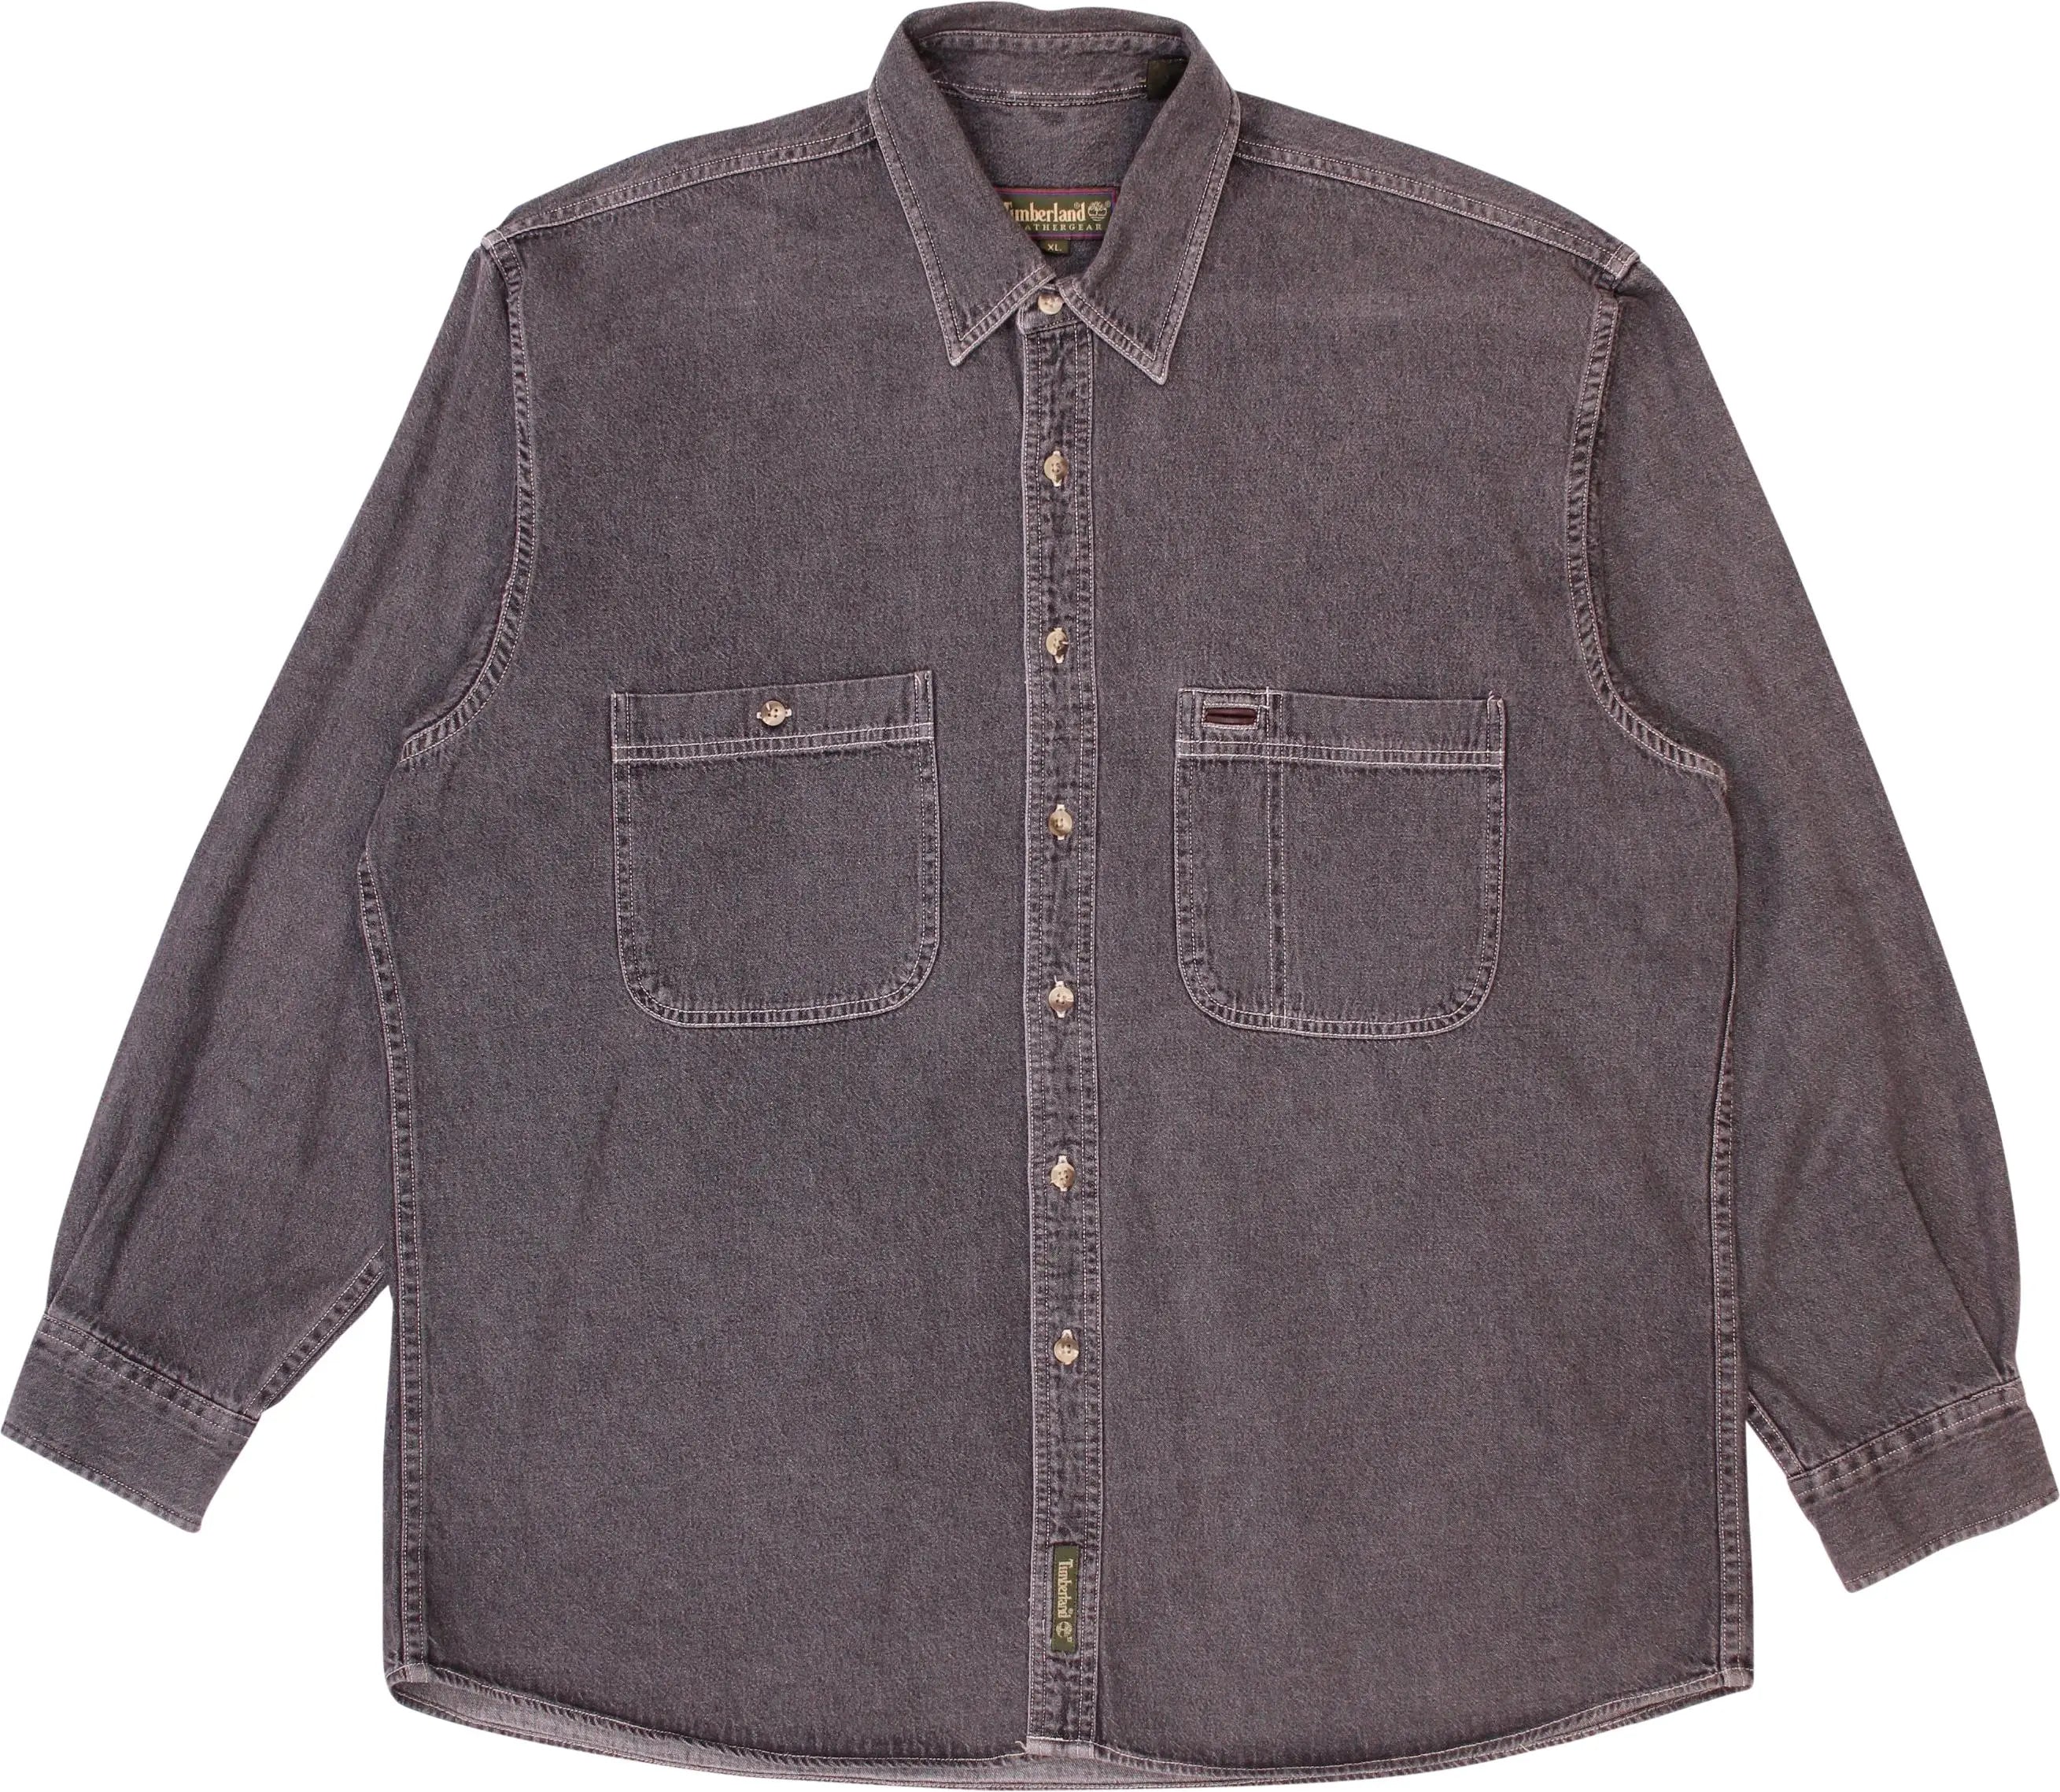 Timberland - Grey Denim Shirt by Timberland- ThriftTale.com - Vintage and second handclothing